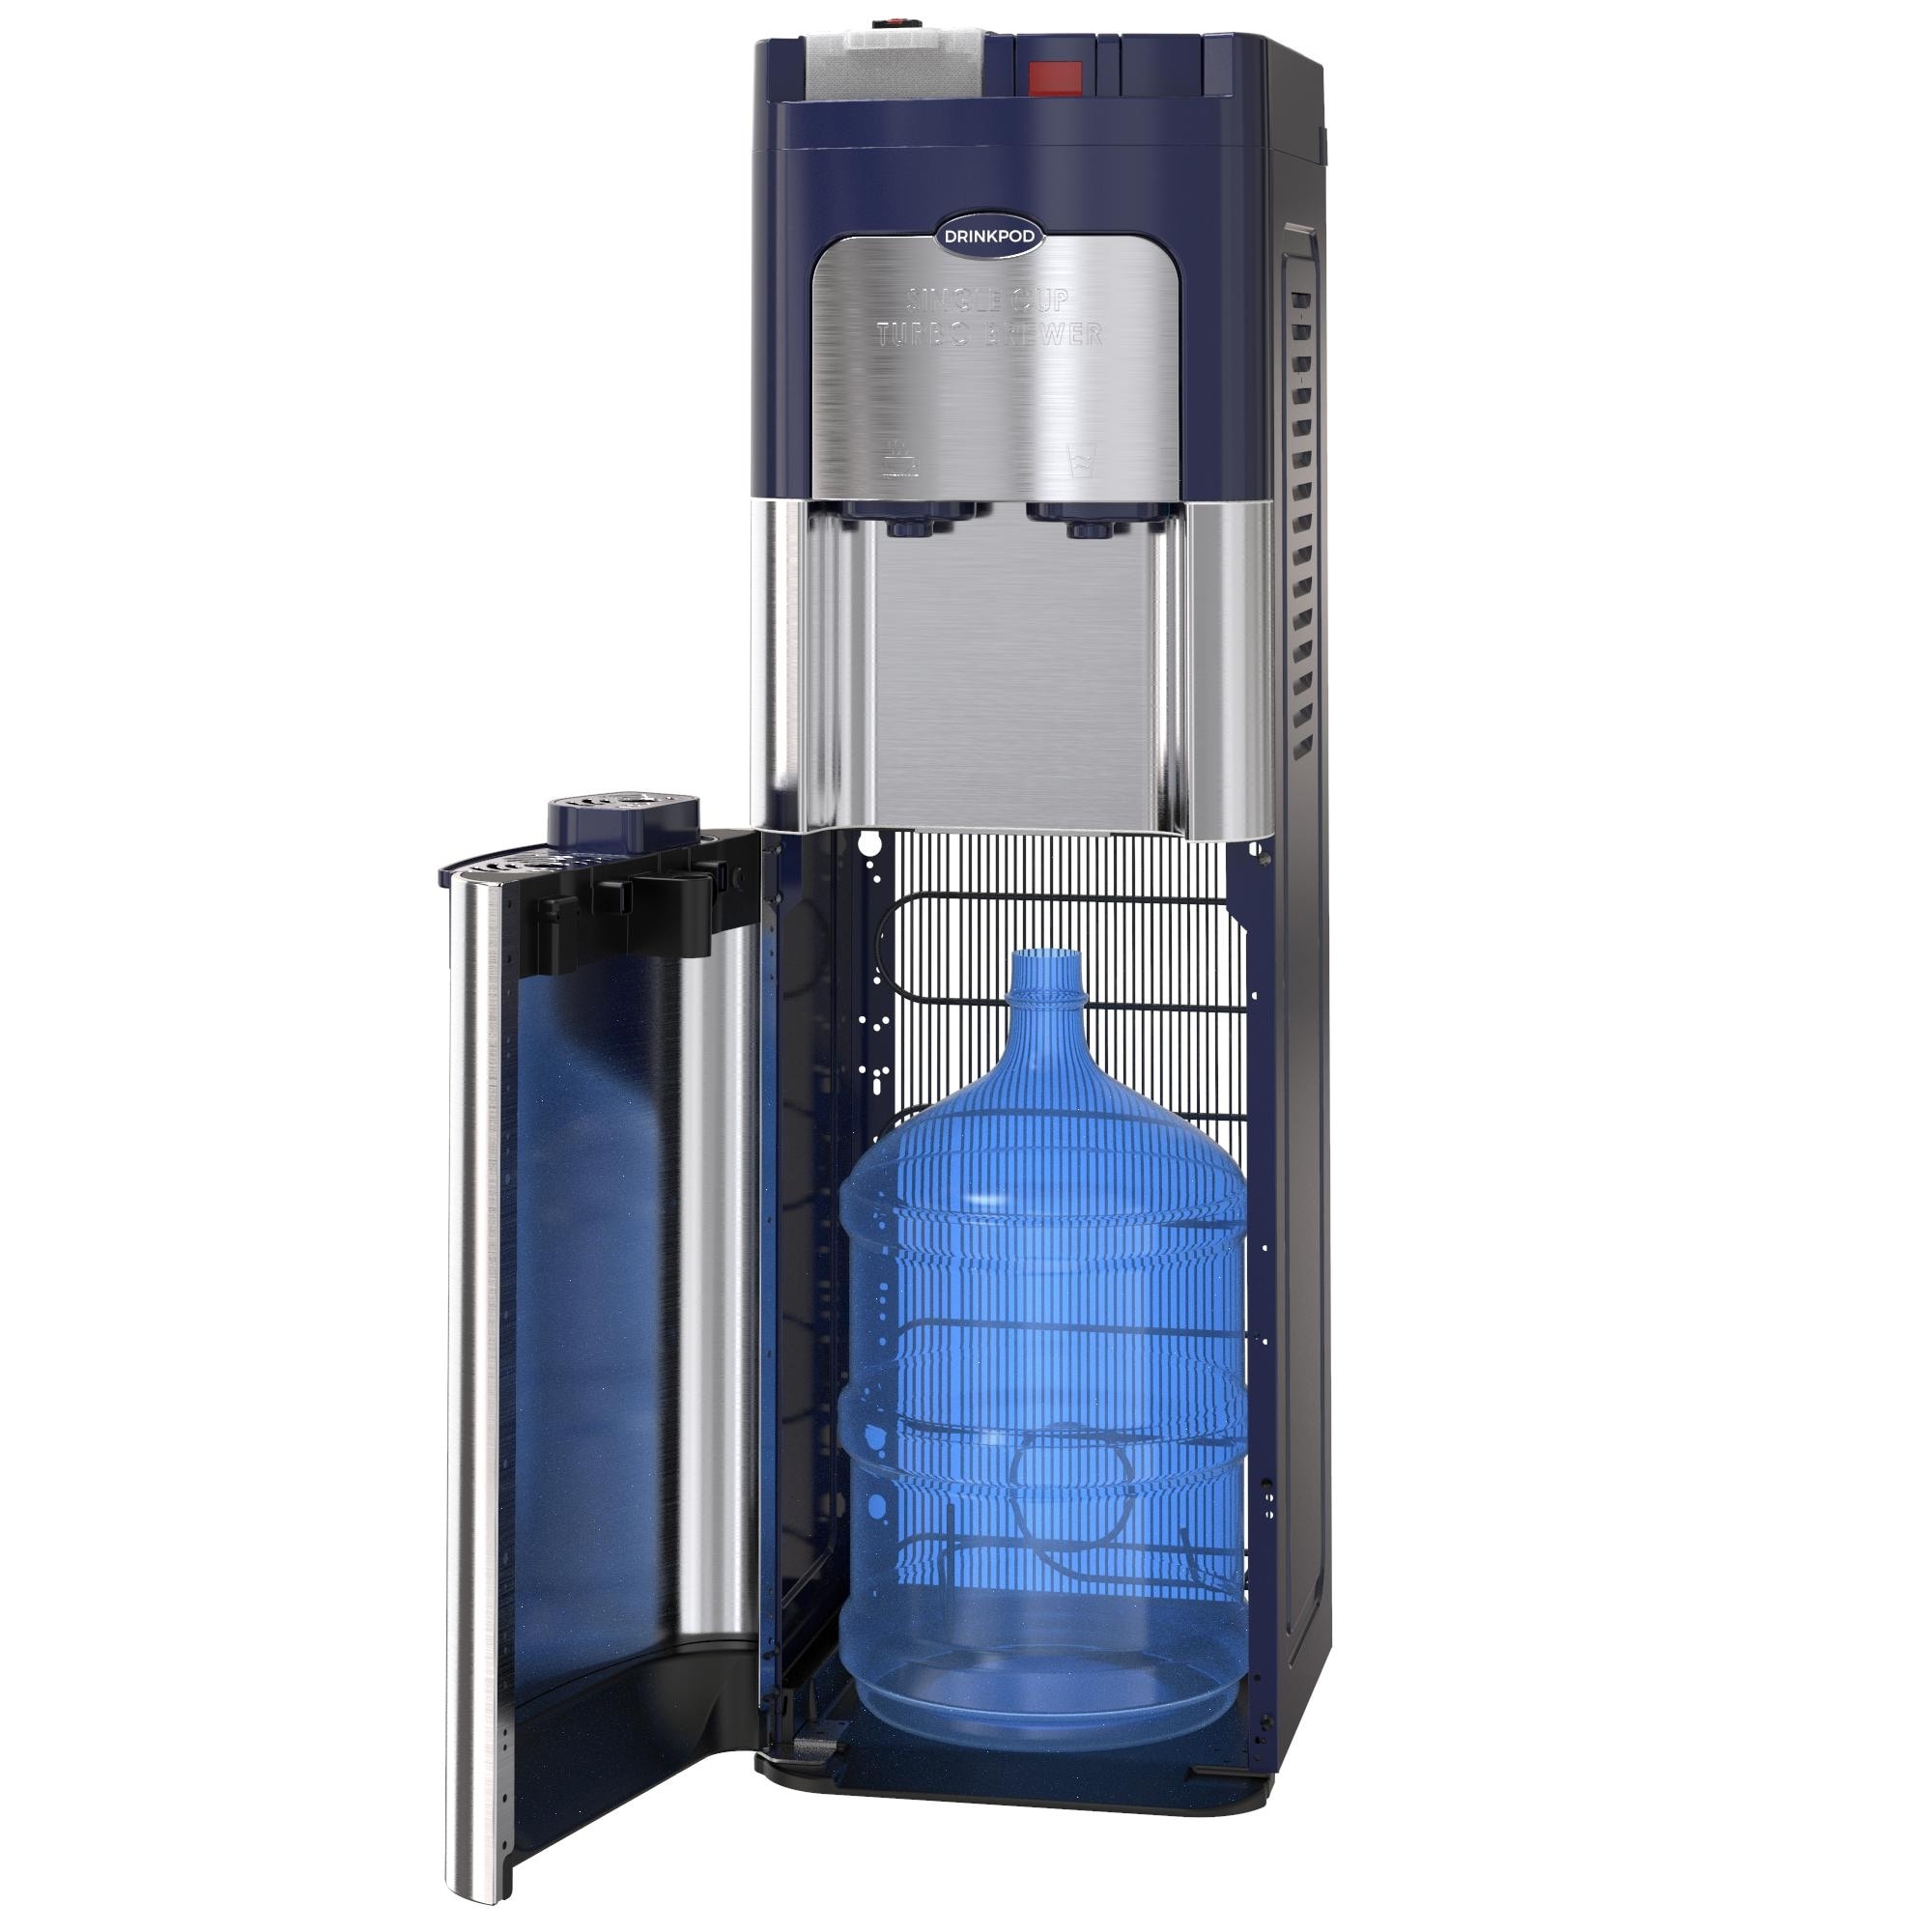 https://ak1.ostkcdn.com/images/products/is/images/direct/49d70ebe3da903eff0079df781c678740675a33f/3000-Elite-Series-Bottleless-Water-Cooler-With-4-Filters-and-Integrated-K-Cup-Coffee-Maker.jpg